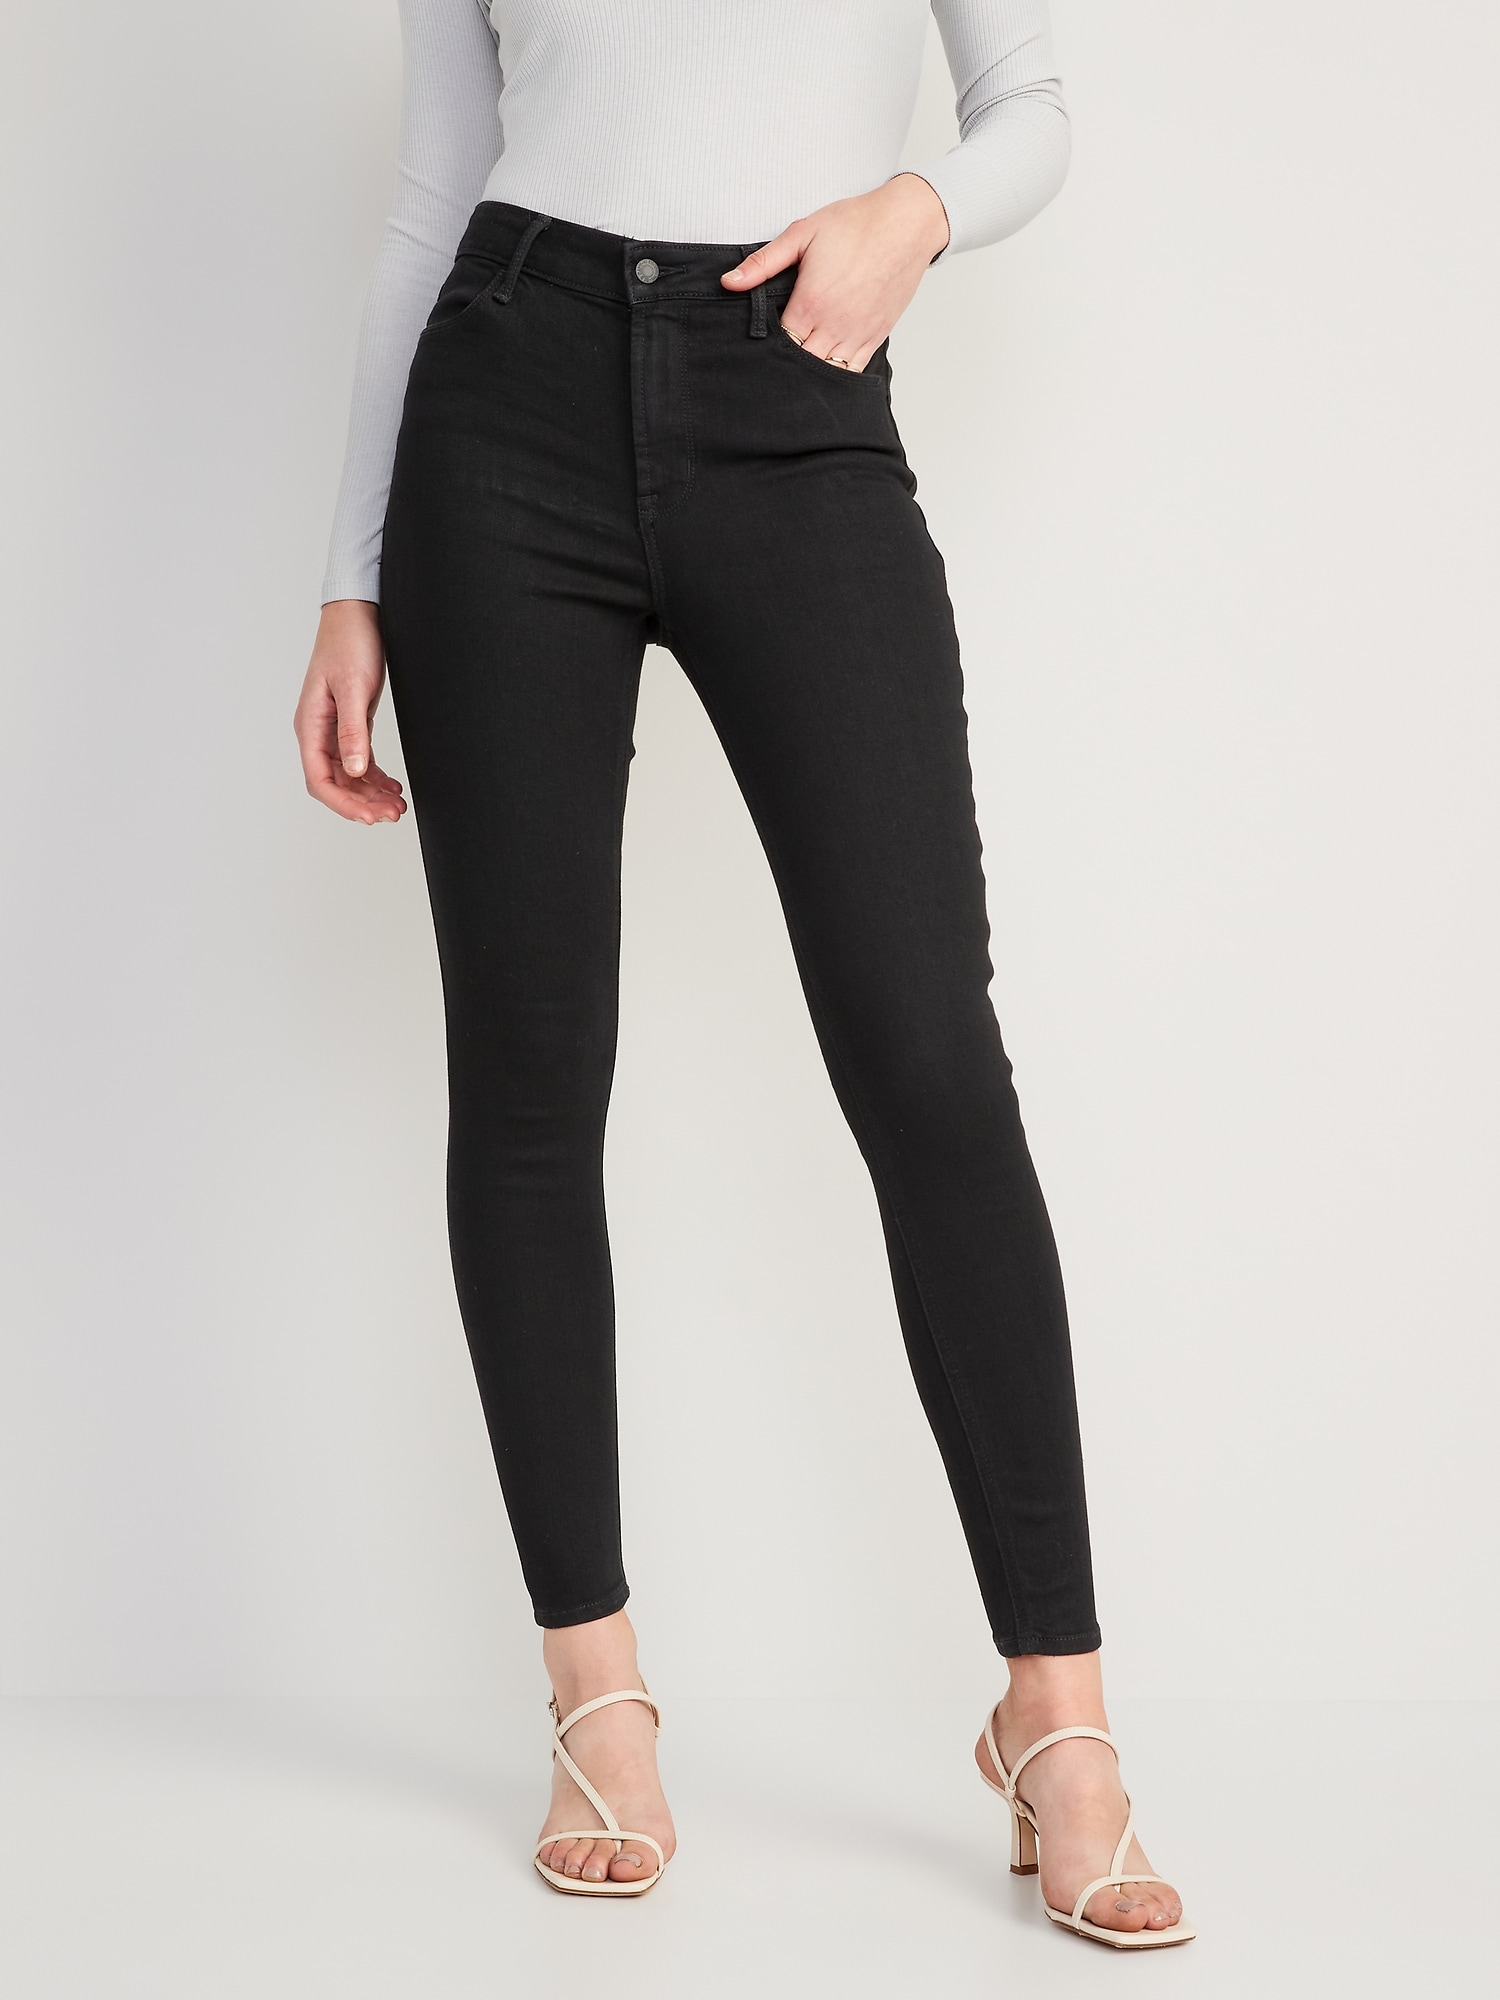 Wow Black-Wash Jeans for Women | Navy